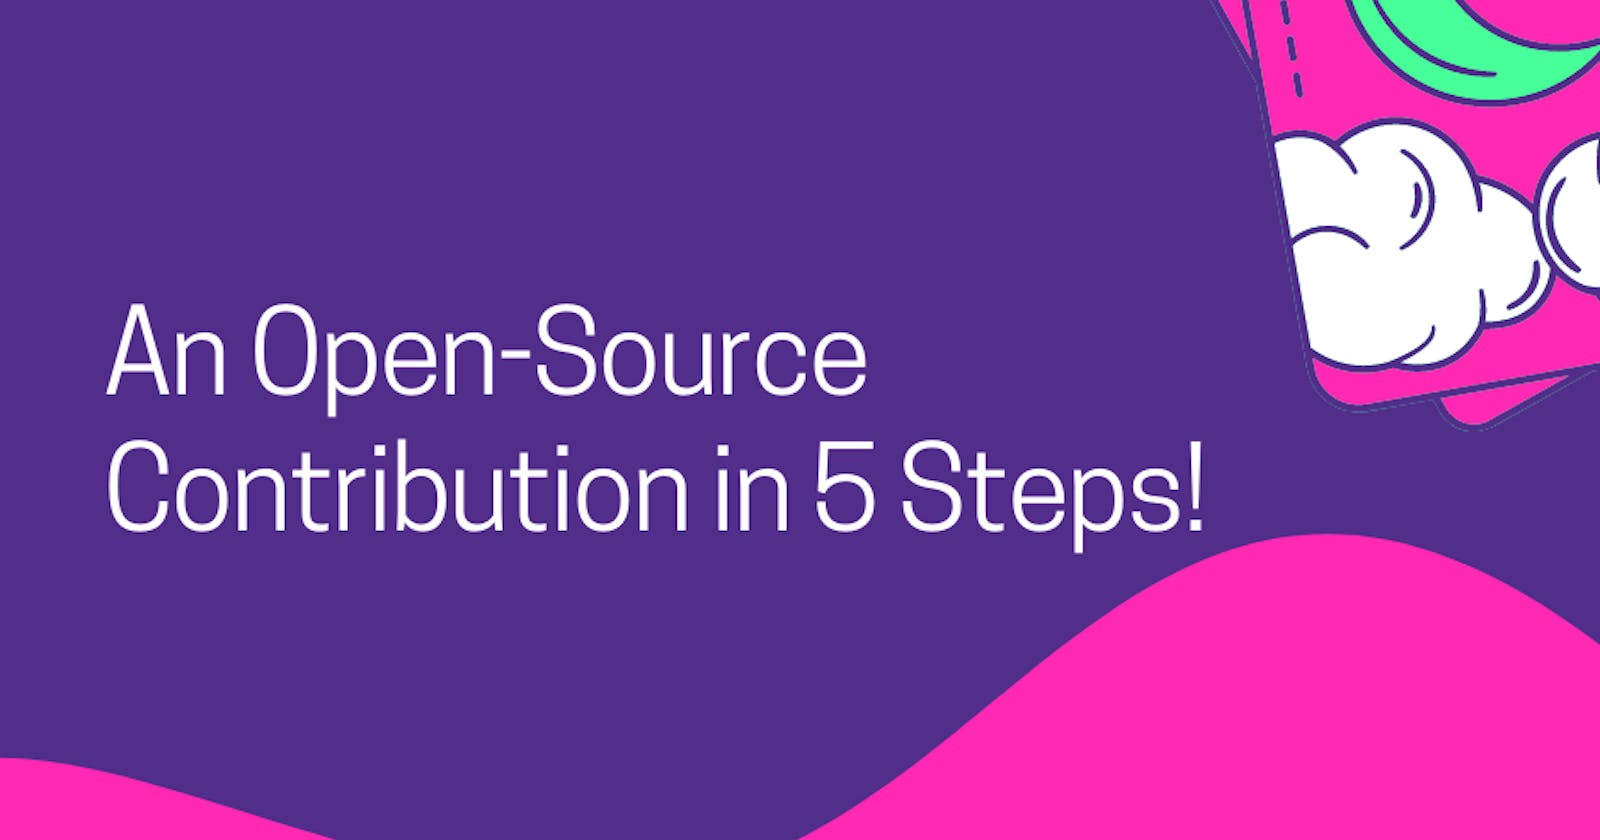 An Open-Source Contribution in 5 Steps!